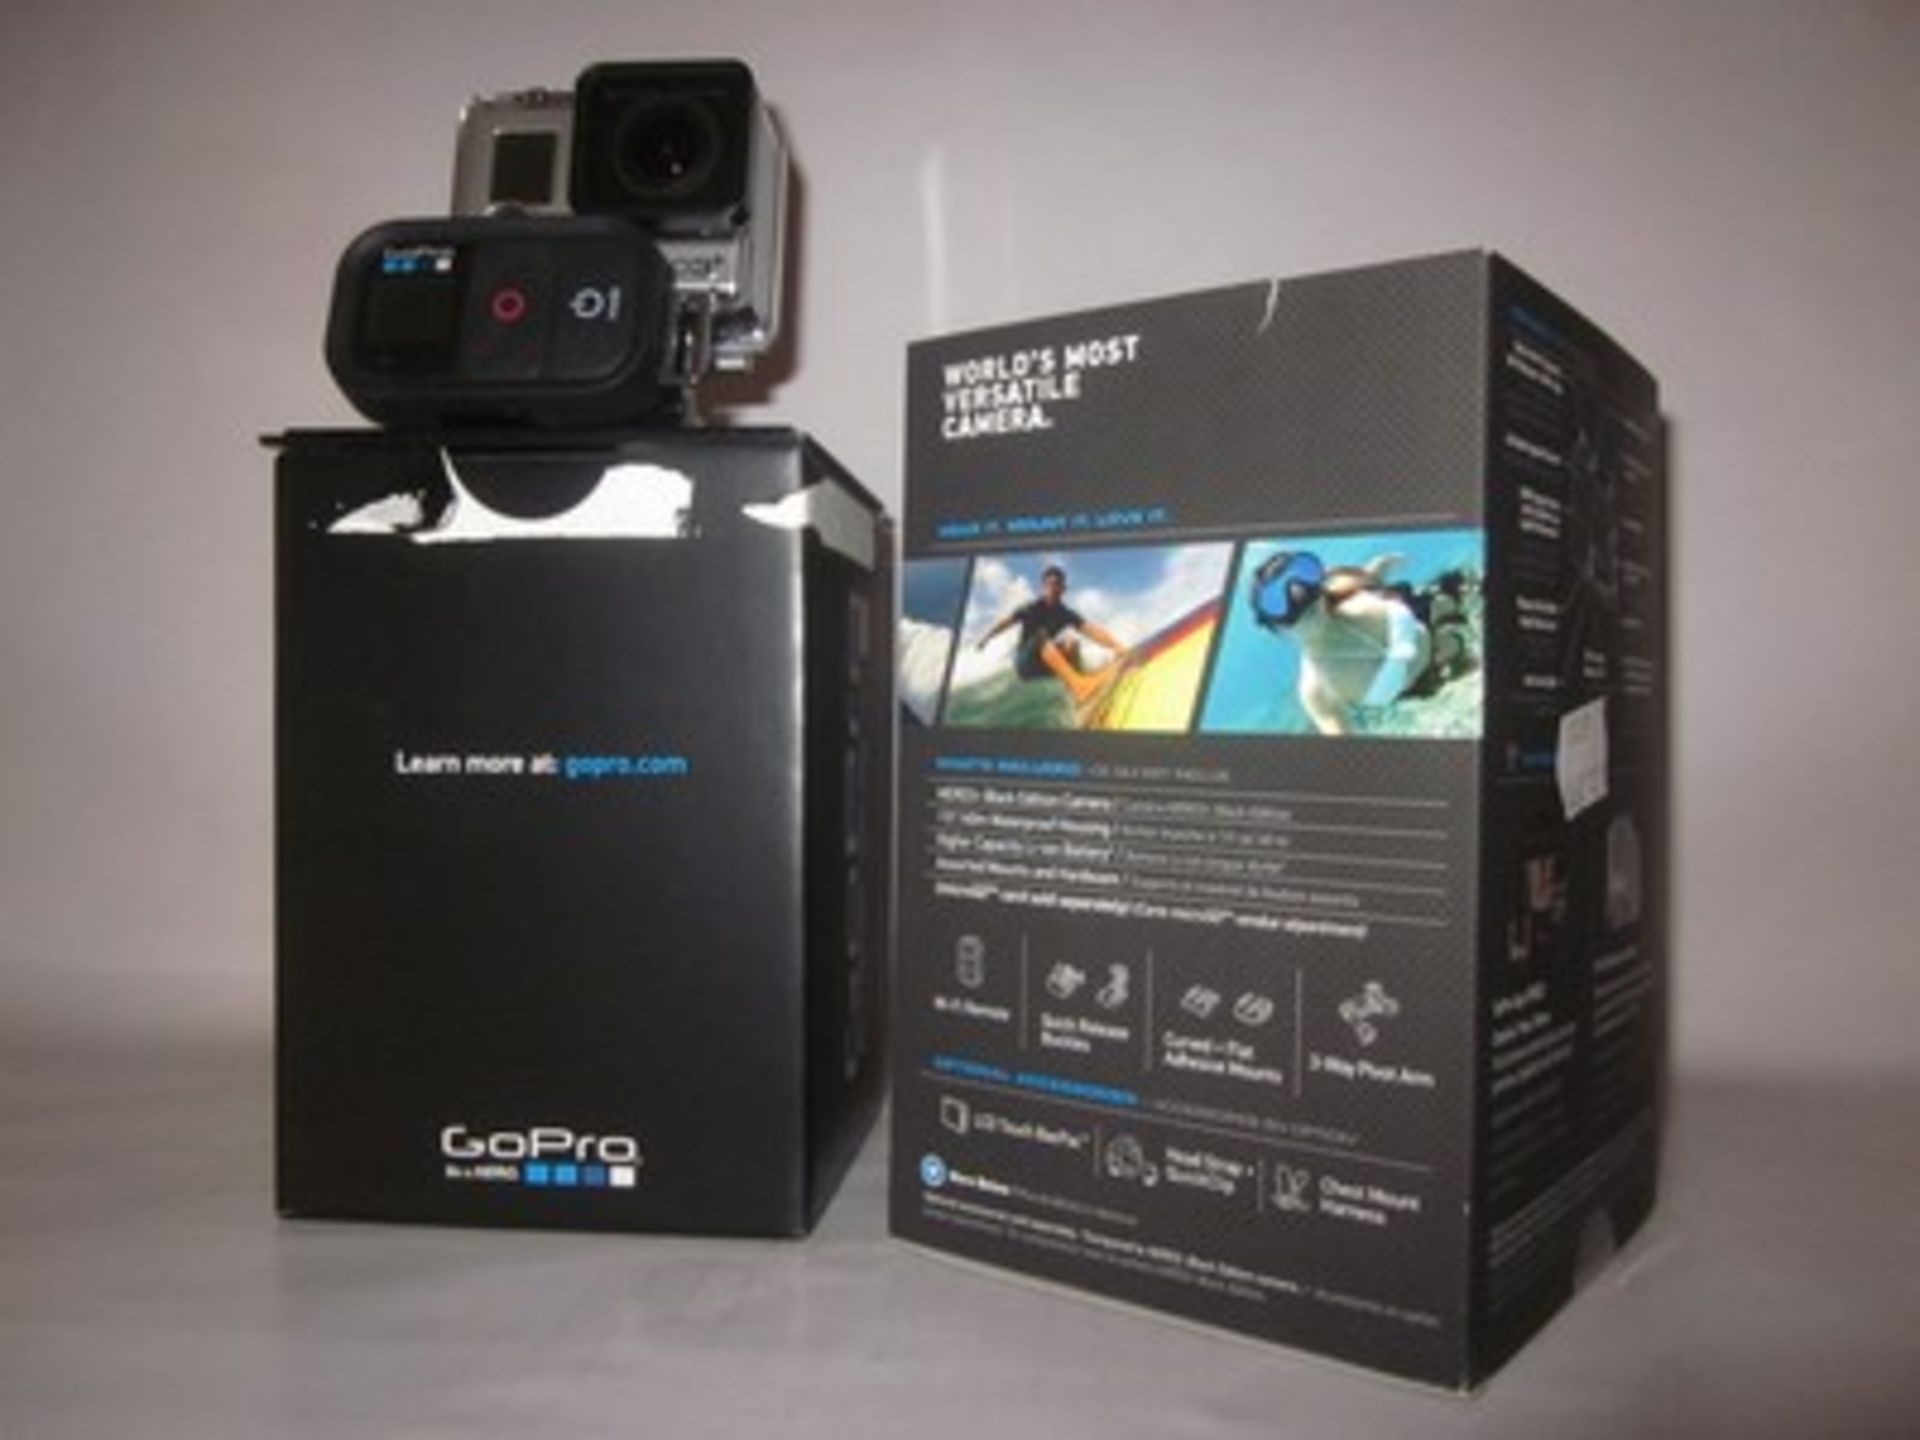 *A GoPro Hero 3+ black edition (Boxed as new).Payment and collection by 5pm Friday 15th January.